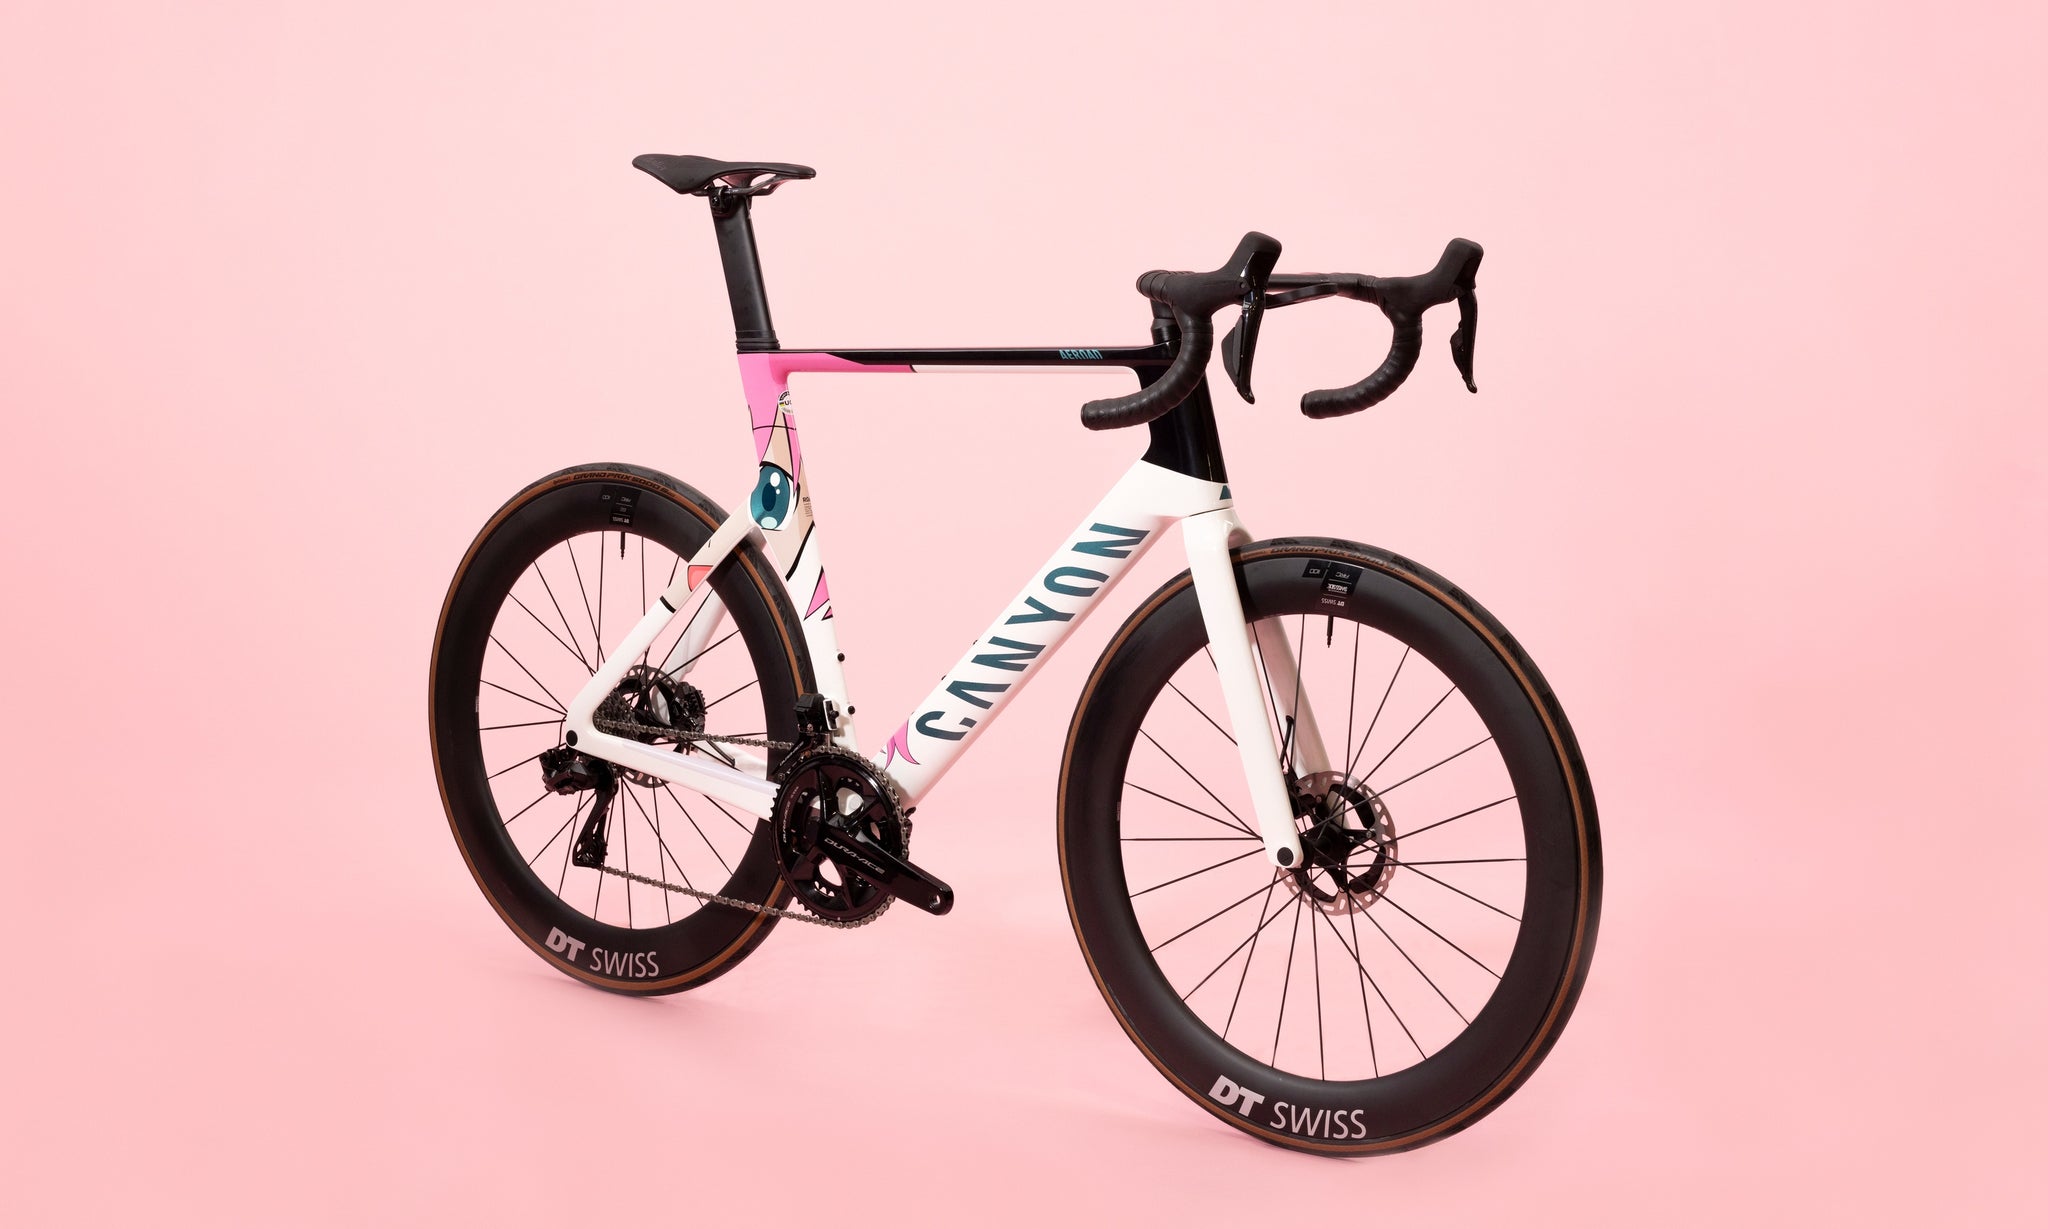 The Anime-Inspired Canyon Aeroad CFR Tokyo Edition: Cringe or Cool?